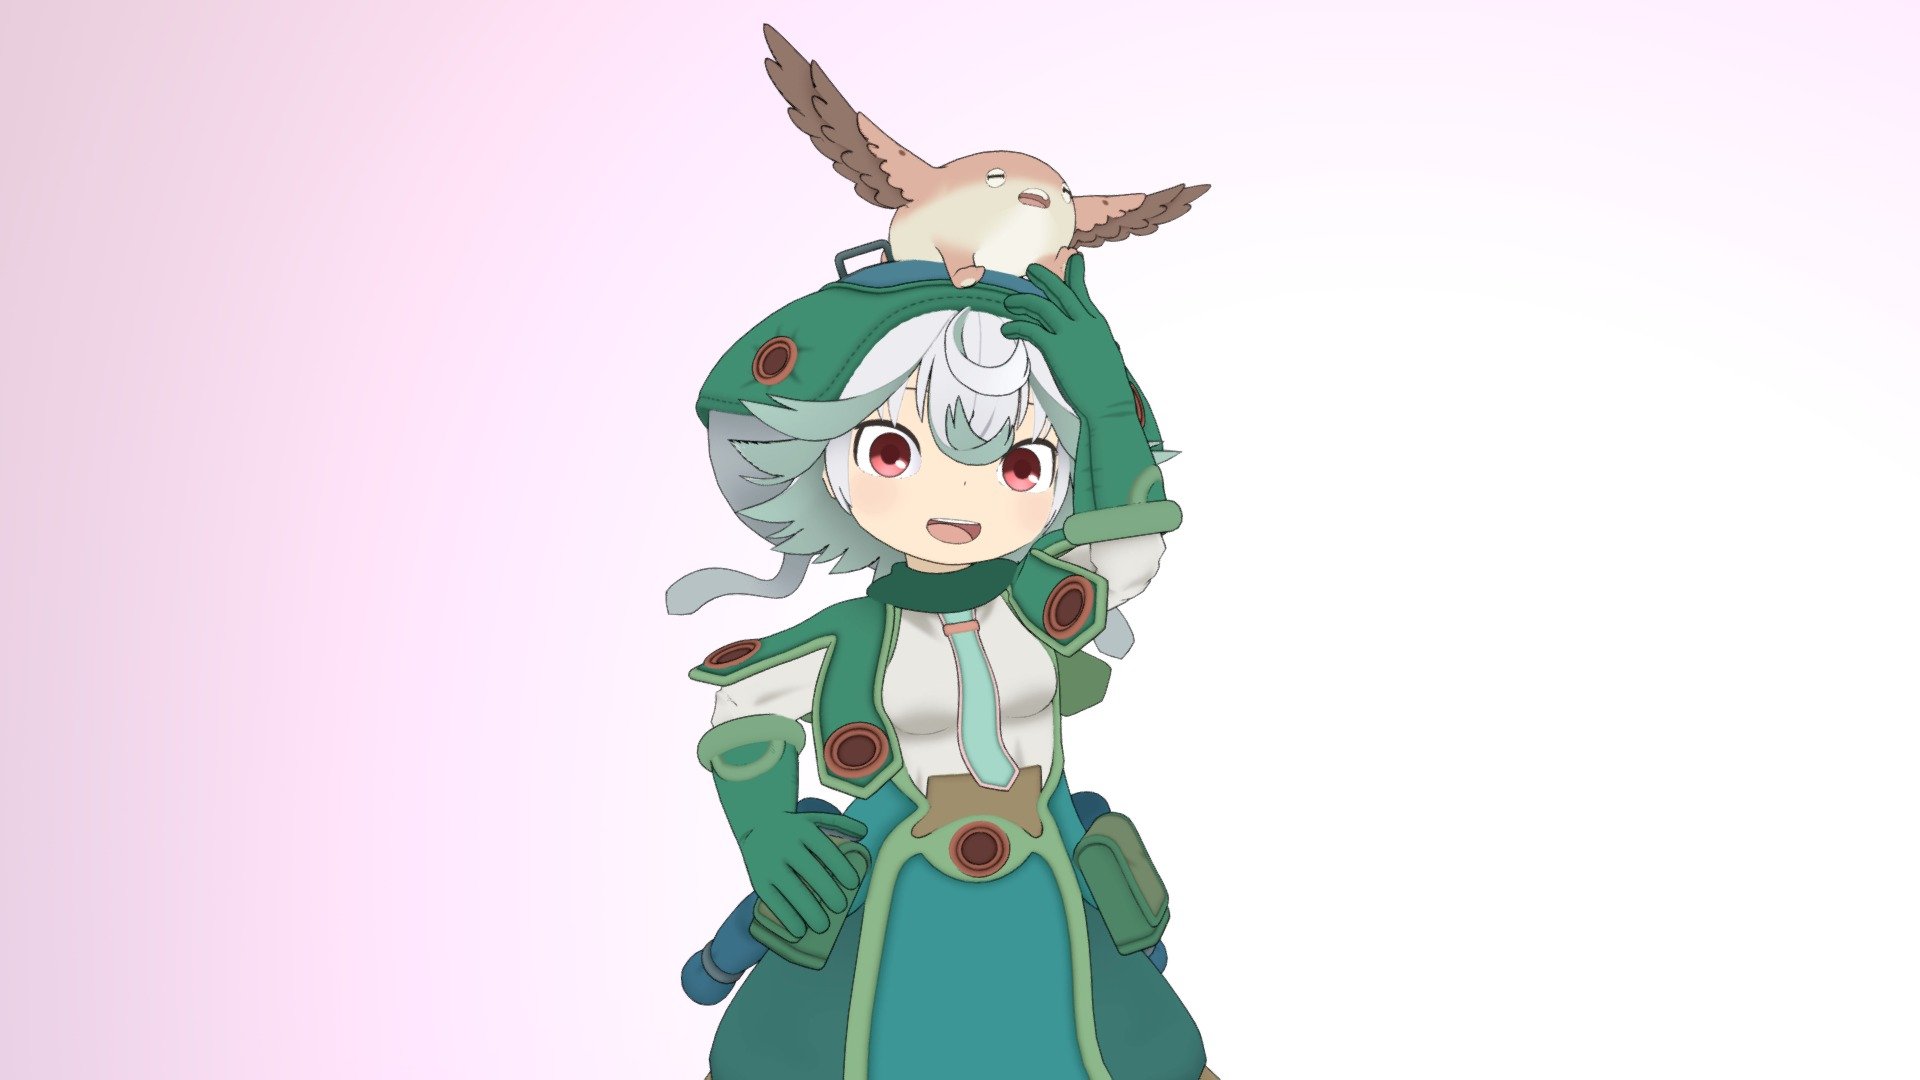 I made Prushka and Meinya from the anime “MADE IN ABYSS” with Blender.

Making video: https://youtu.be/jiYlcOgAVvc - MADE IN ABYSS - Prushka＆Meinya - 3D model by vanilla_coffee_ice (@baniracoffee) 3d model